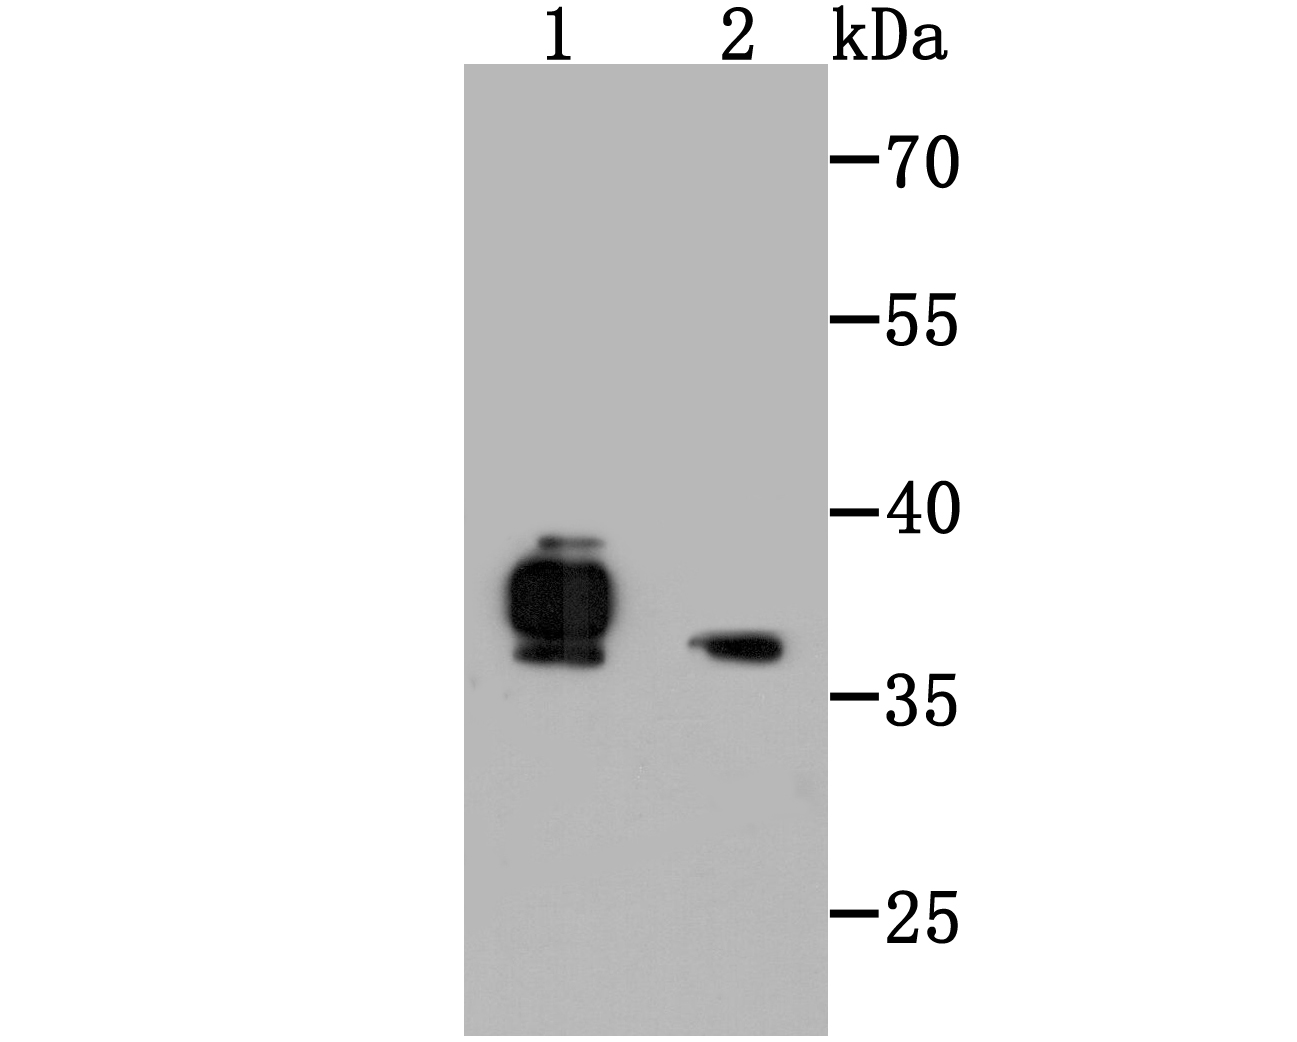 Fig1: Western blot analysis of FPR1 on MEF (1) and HES (2) cell lysate using anti-FPR1 antibody at 1/500 dilution.